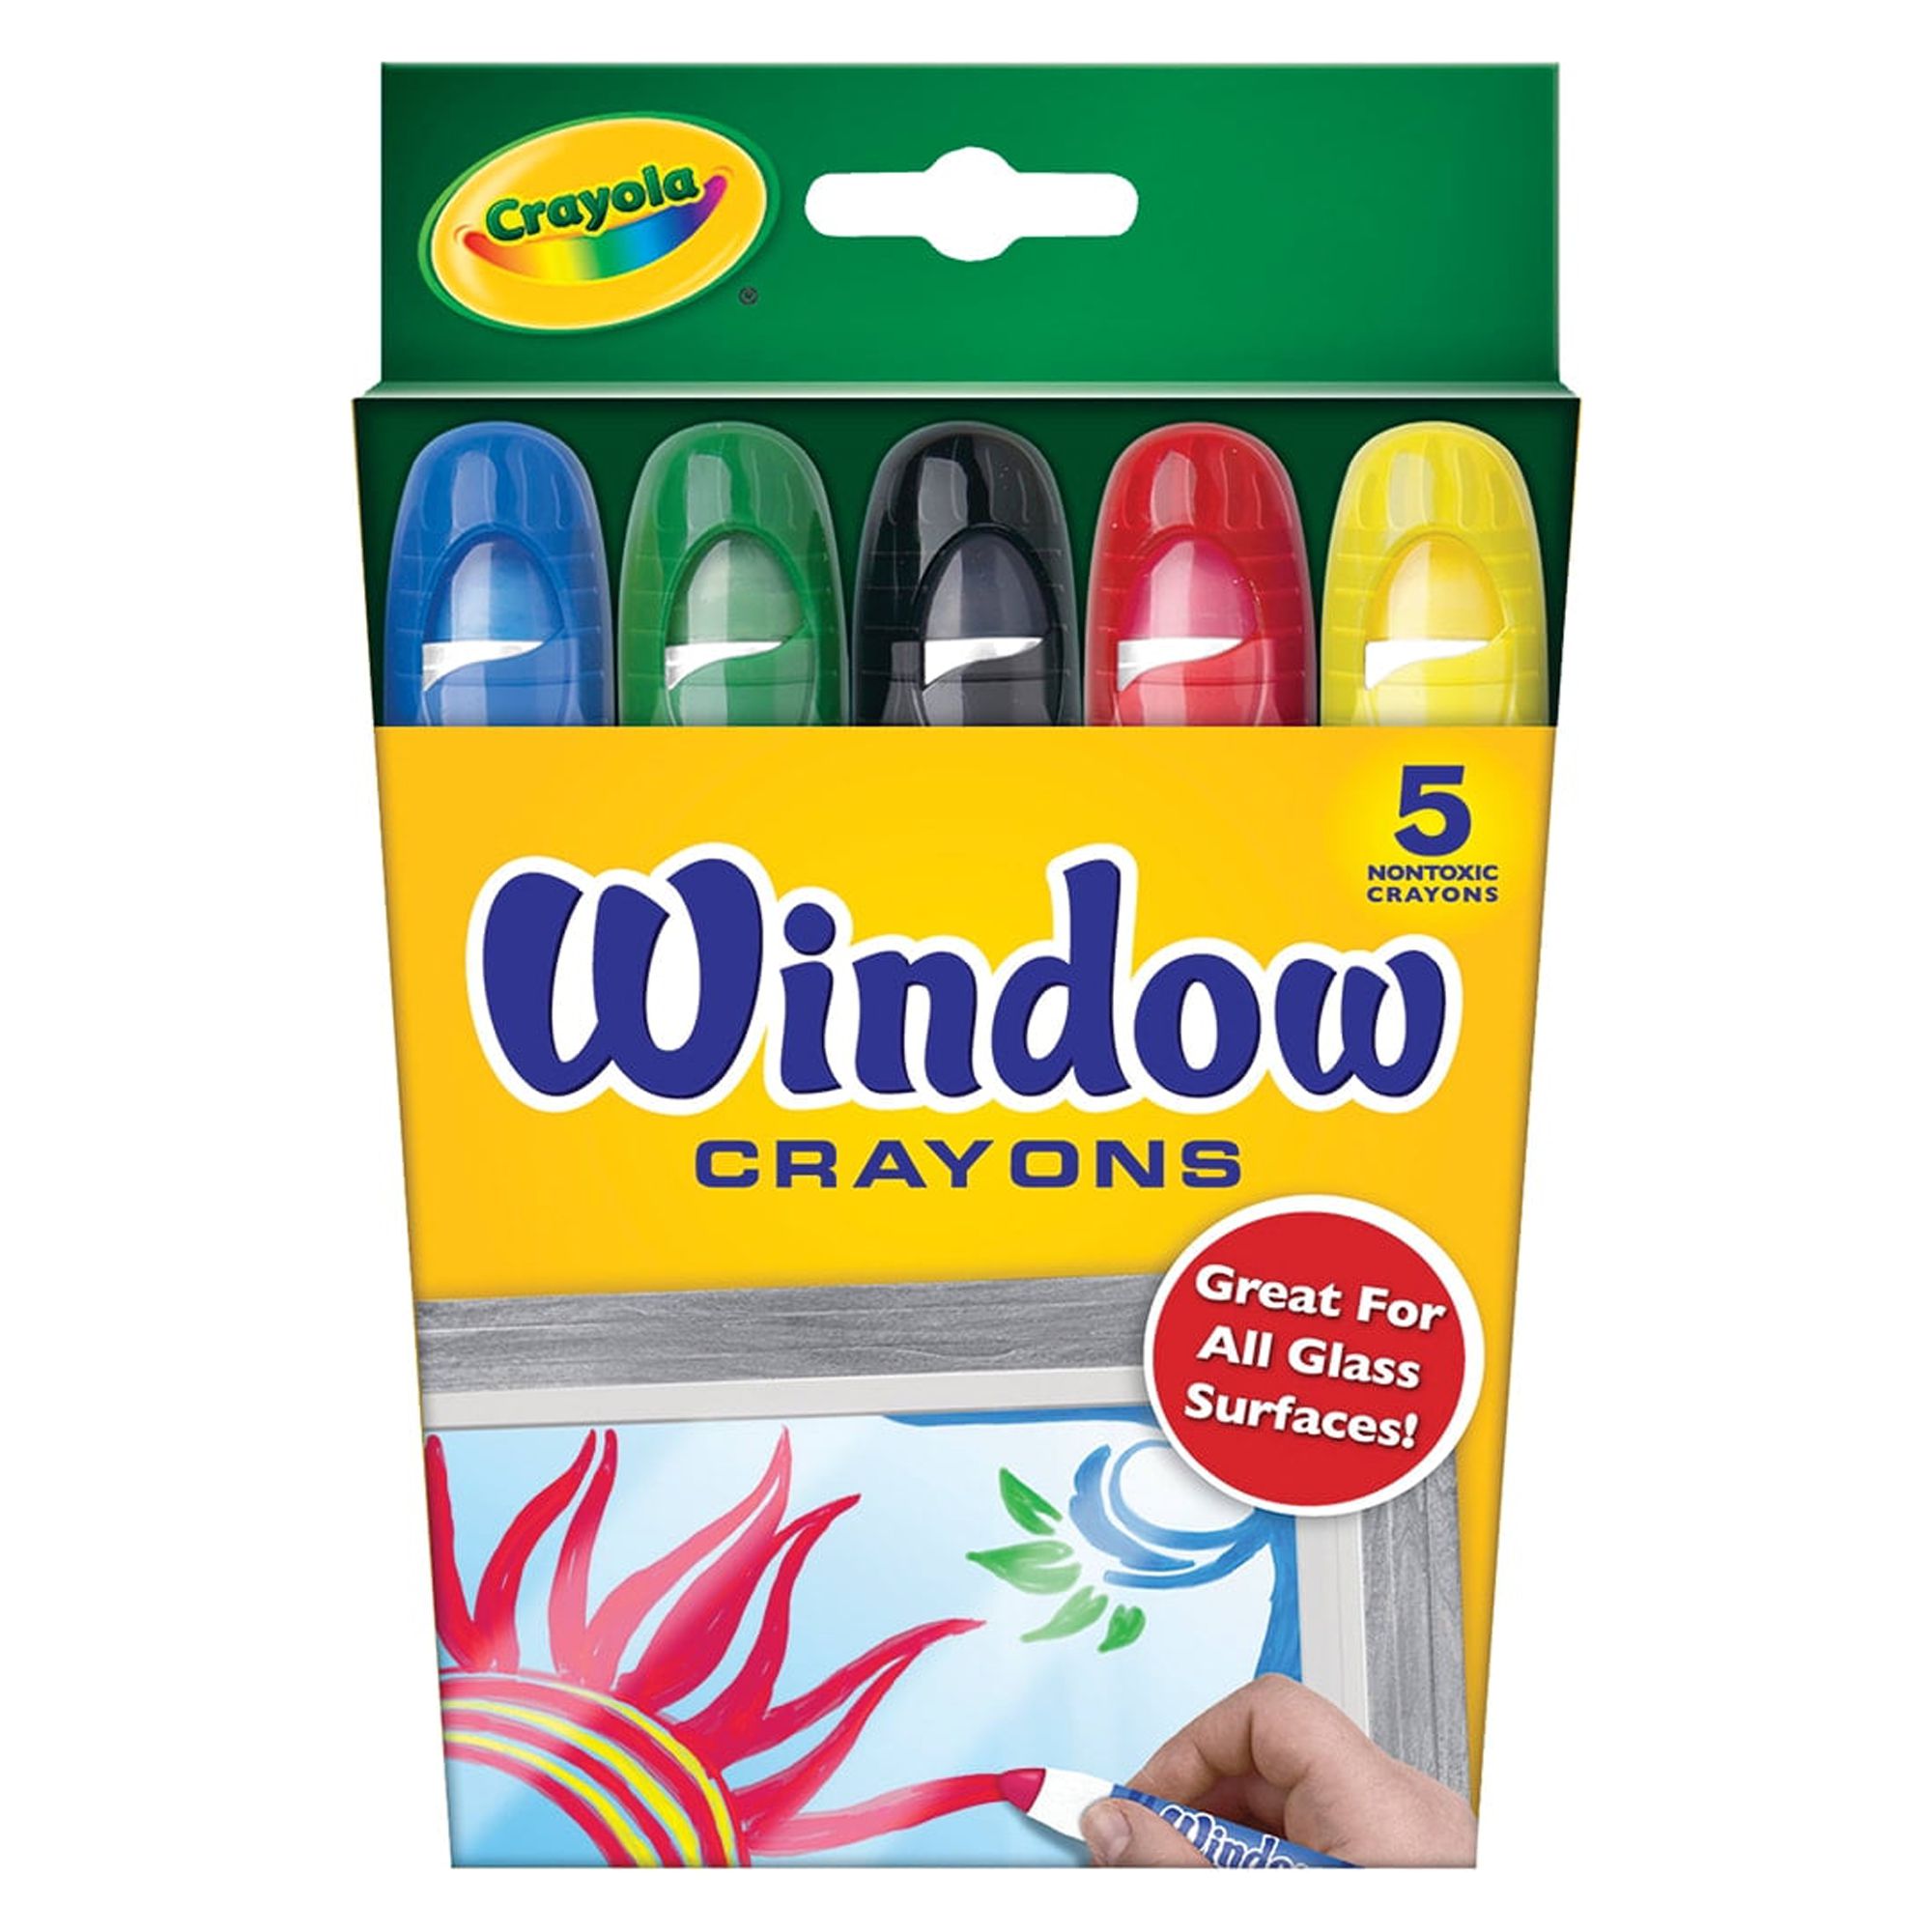 Crayola Washable Window Crayons, 5 Count, Red,Blue,Black,Green,Yellow - image 1 of 6